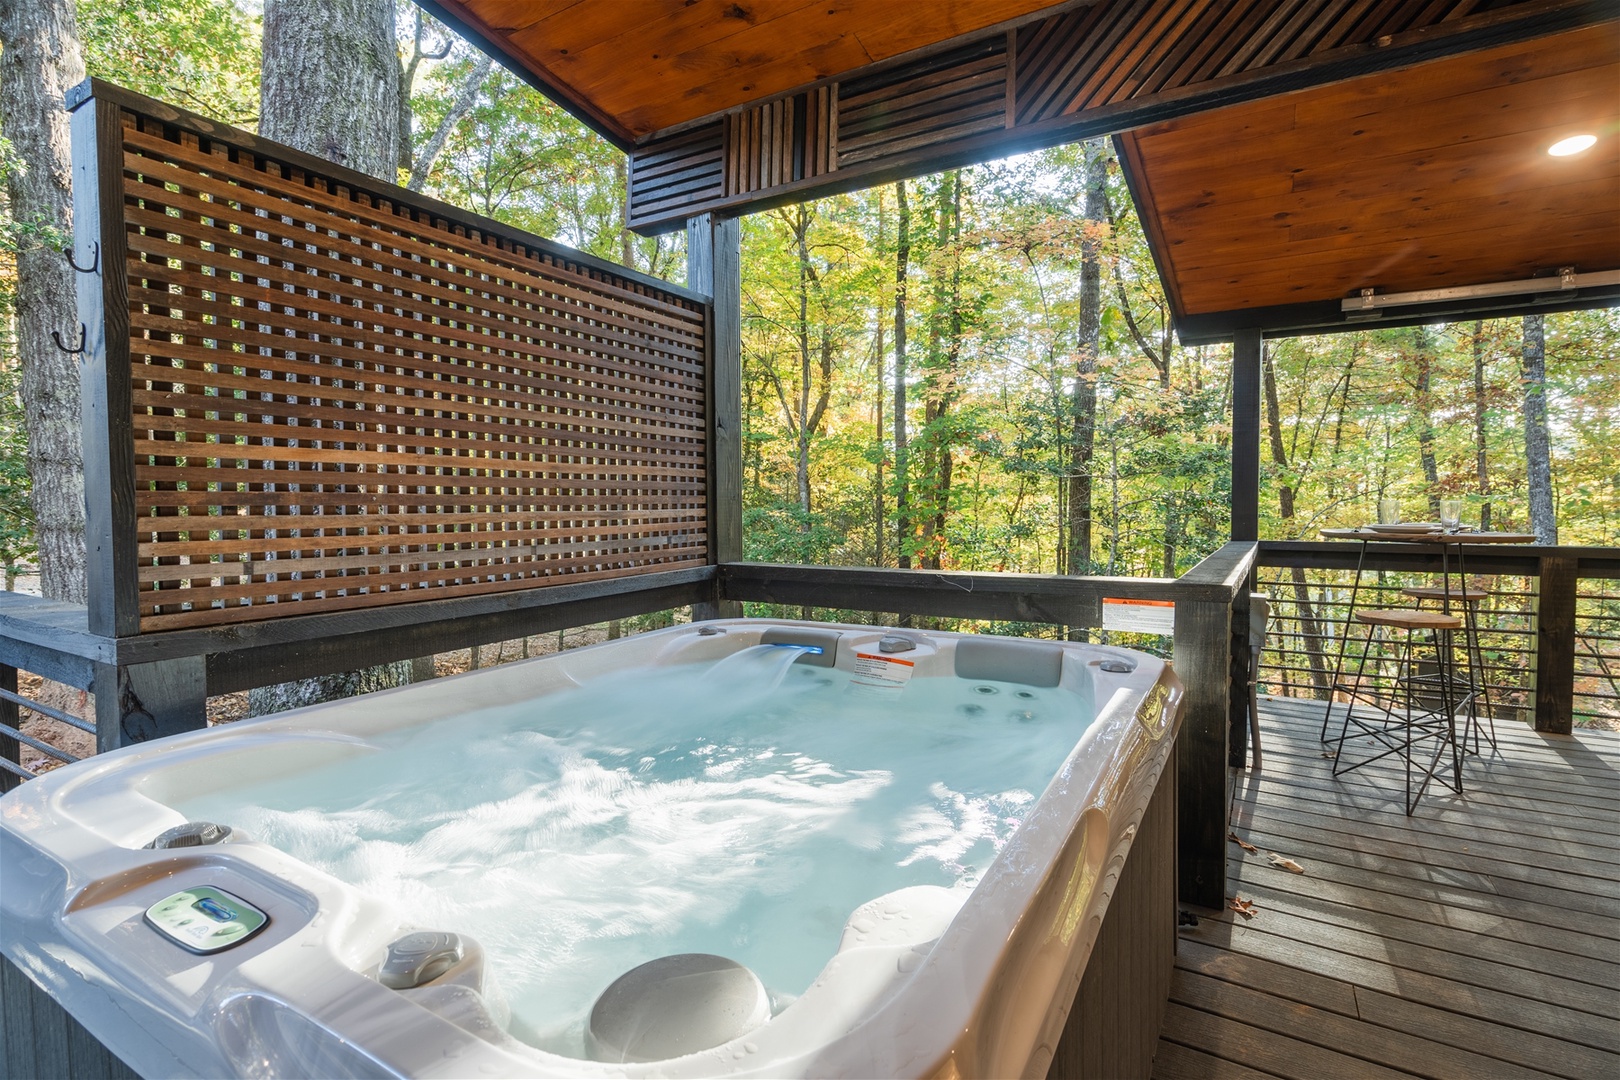 Easy Tiger - Hot tub with privacy wall